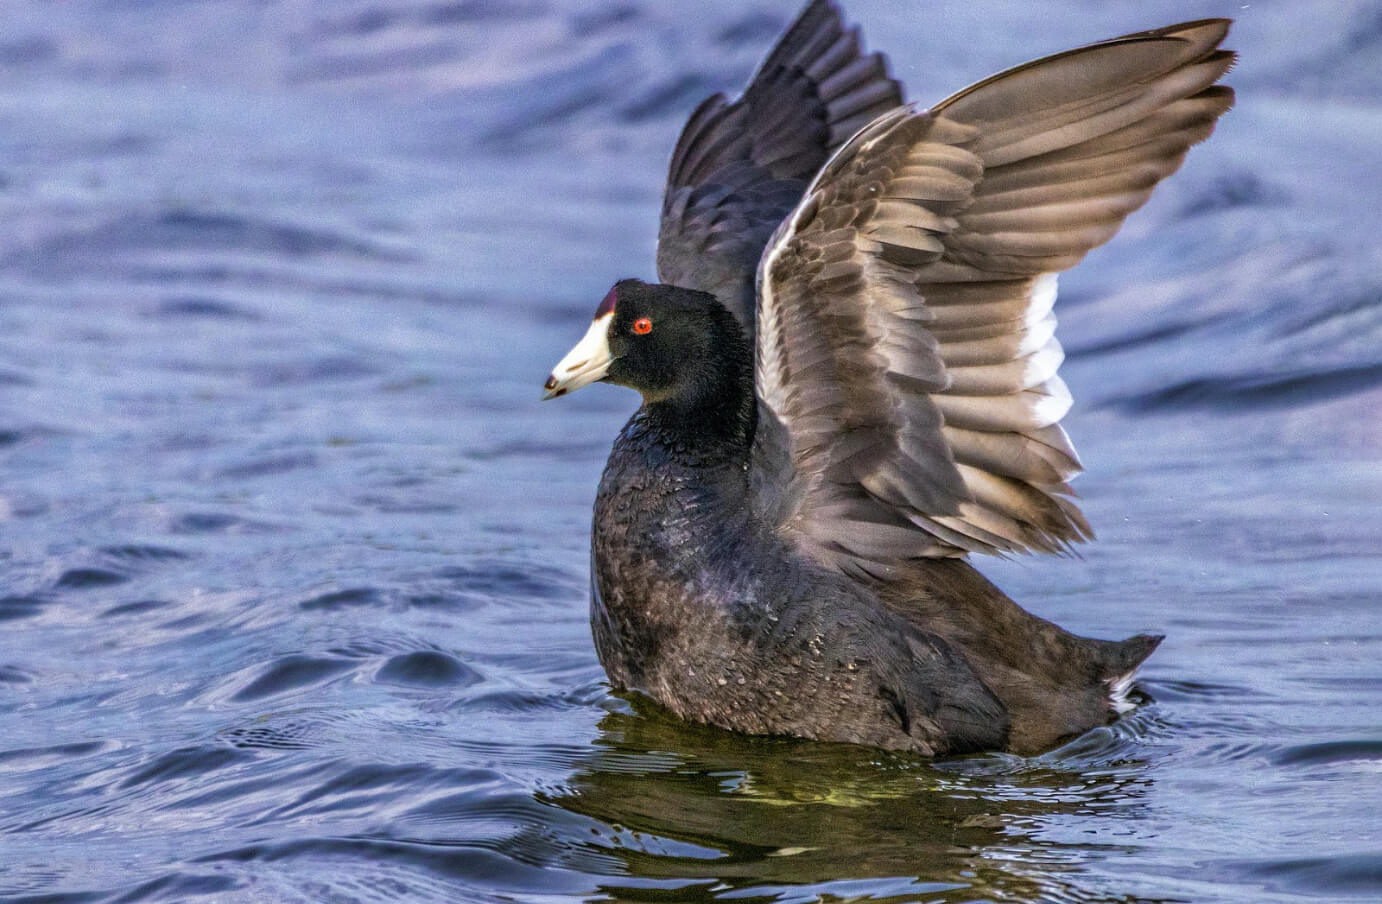 Picture of a single American Coot in a body of water with its wings extended, preparing to take flight